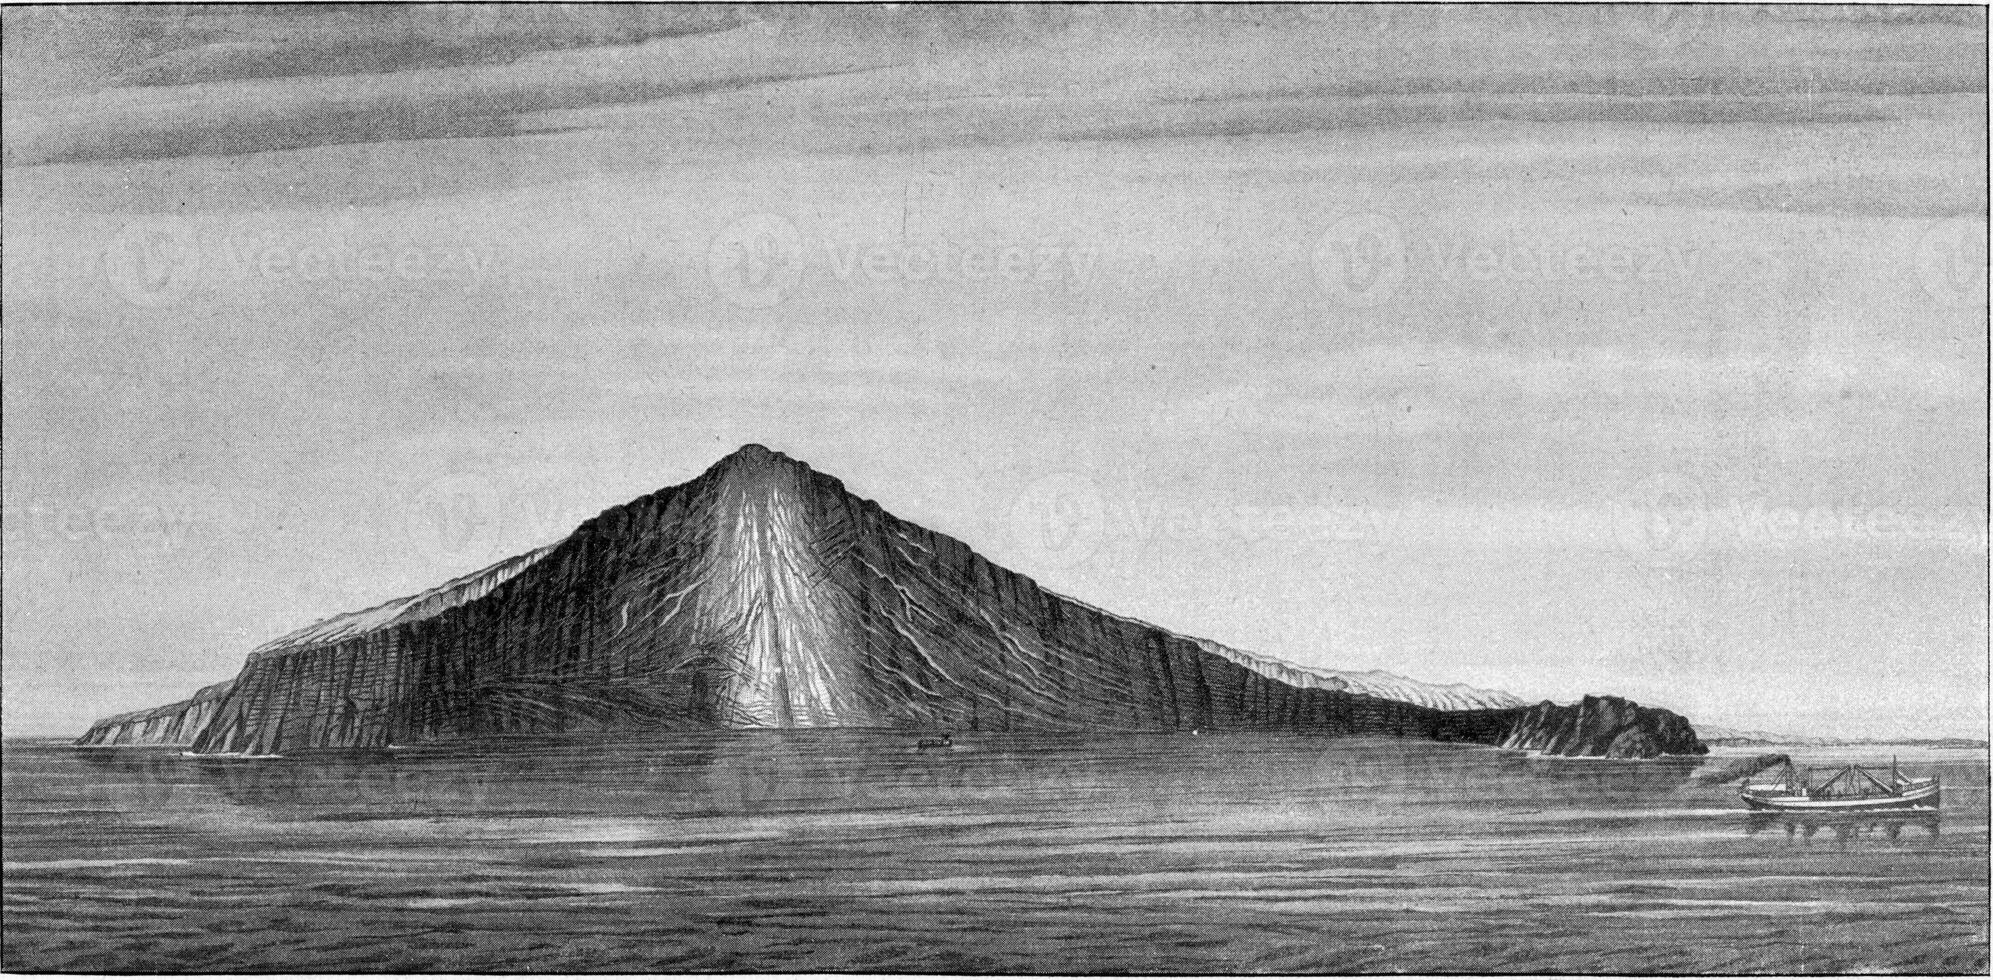 Trench produced by the eruption of 1883 Krakatoa volcano in the Strait of Sunda, vintage engraving. photo